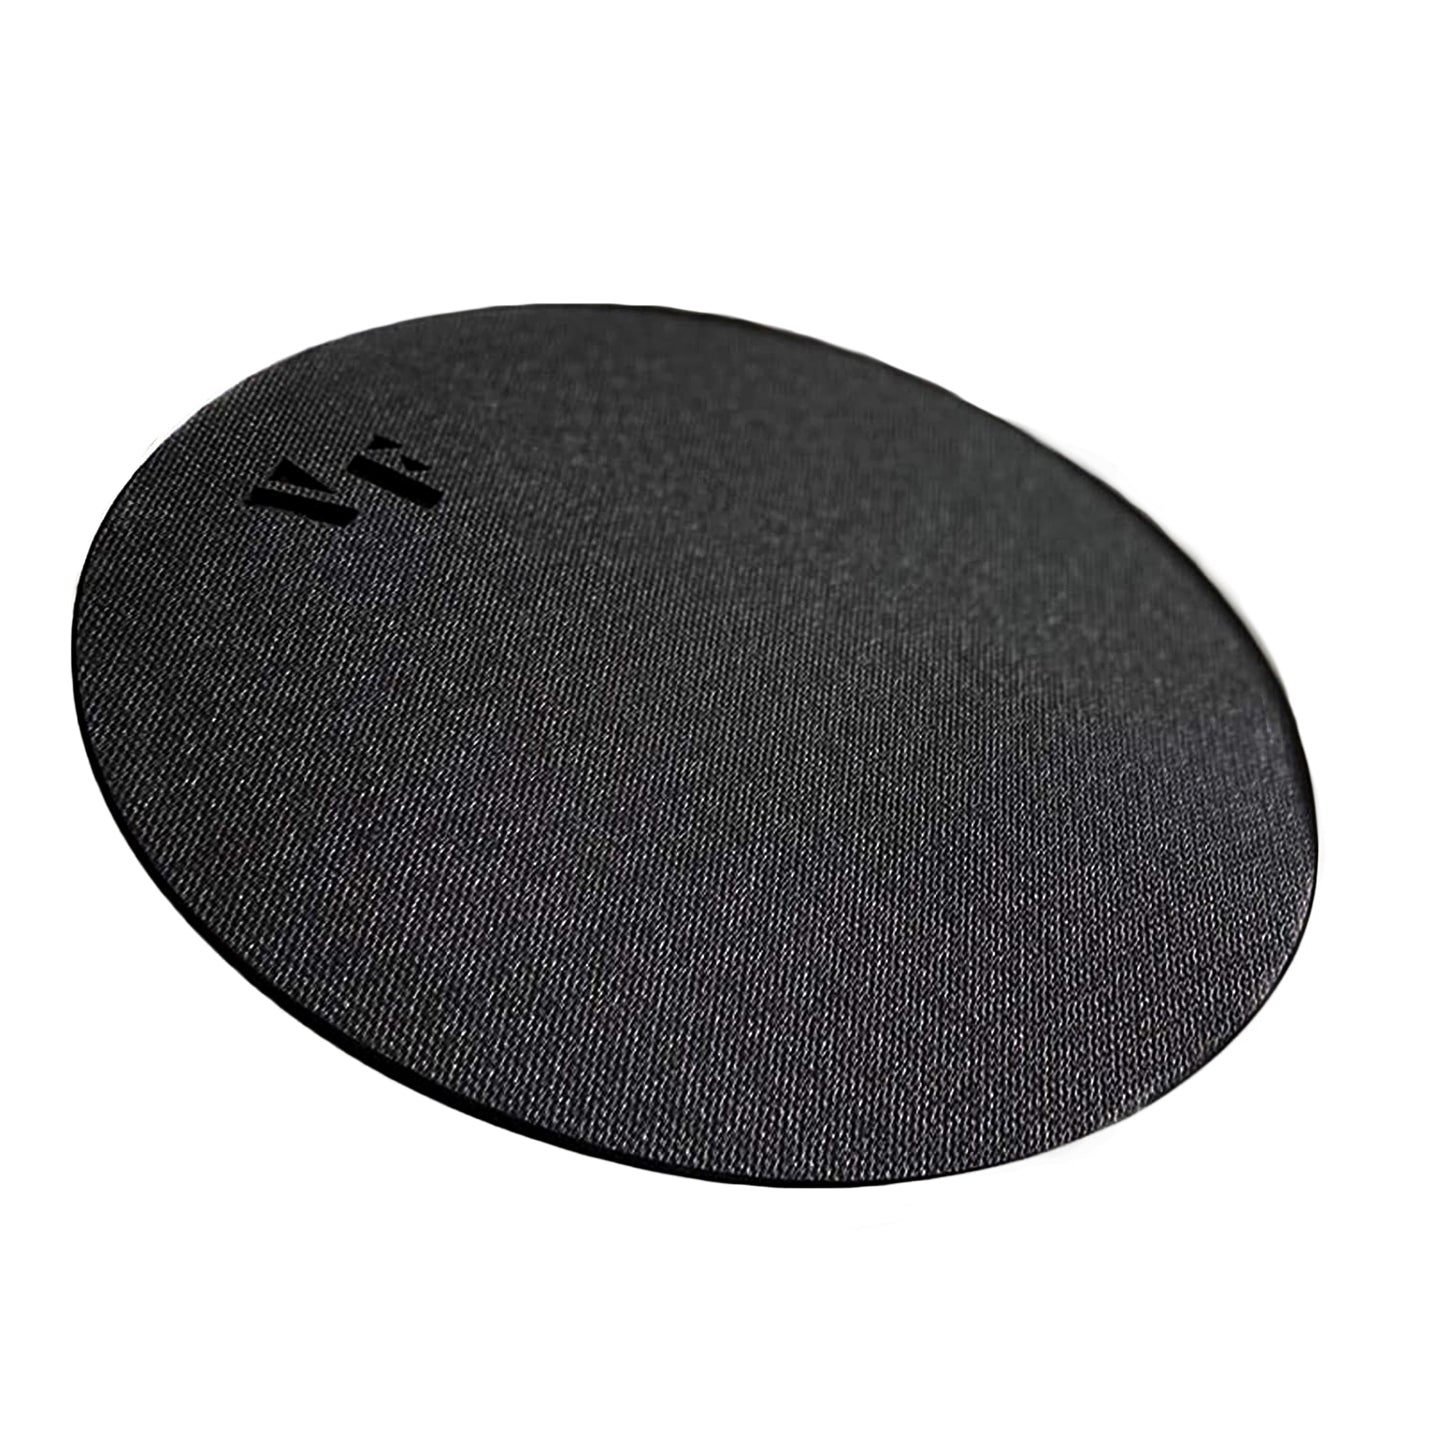 Vic Firth 14" Non Slip Rubber Drum Mute Compatible with Drumset, Concert Drums, Marching Drums